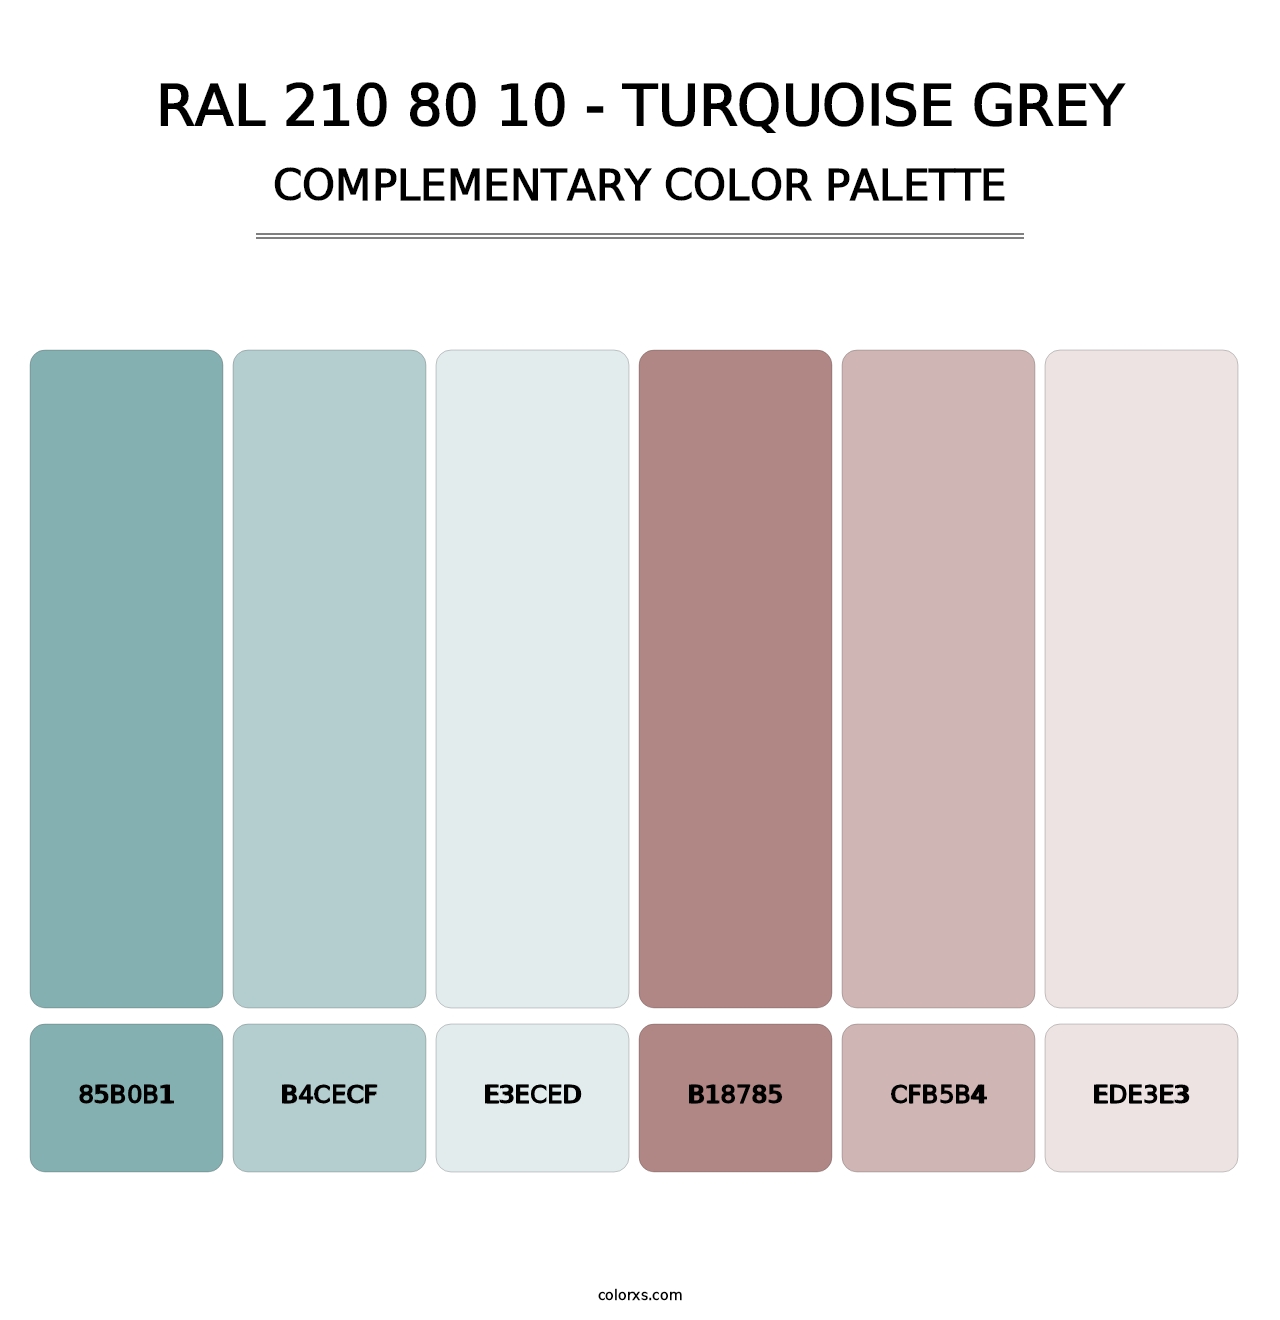 RAL 210 80 10 - Turquoise Grey - Complementary Color Palette